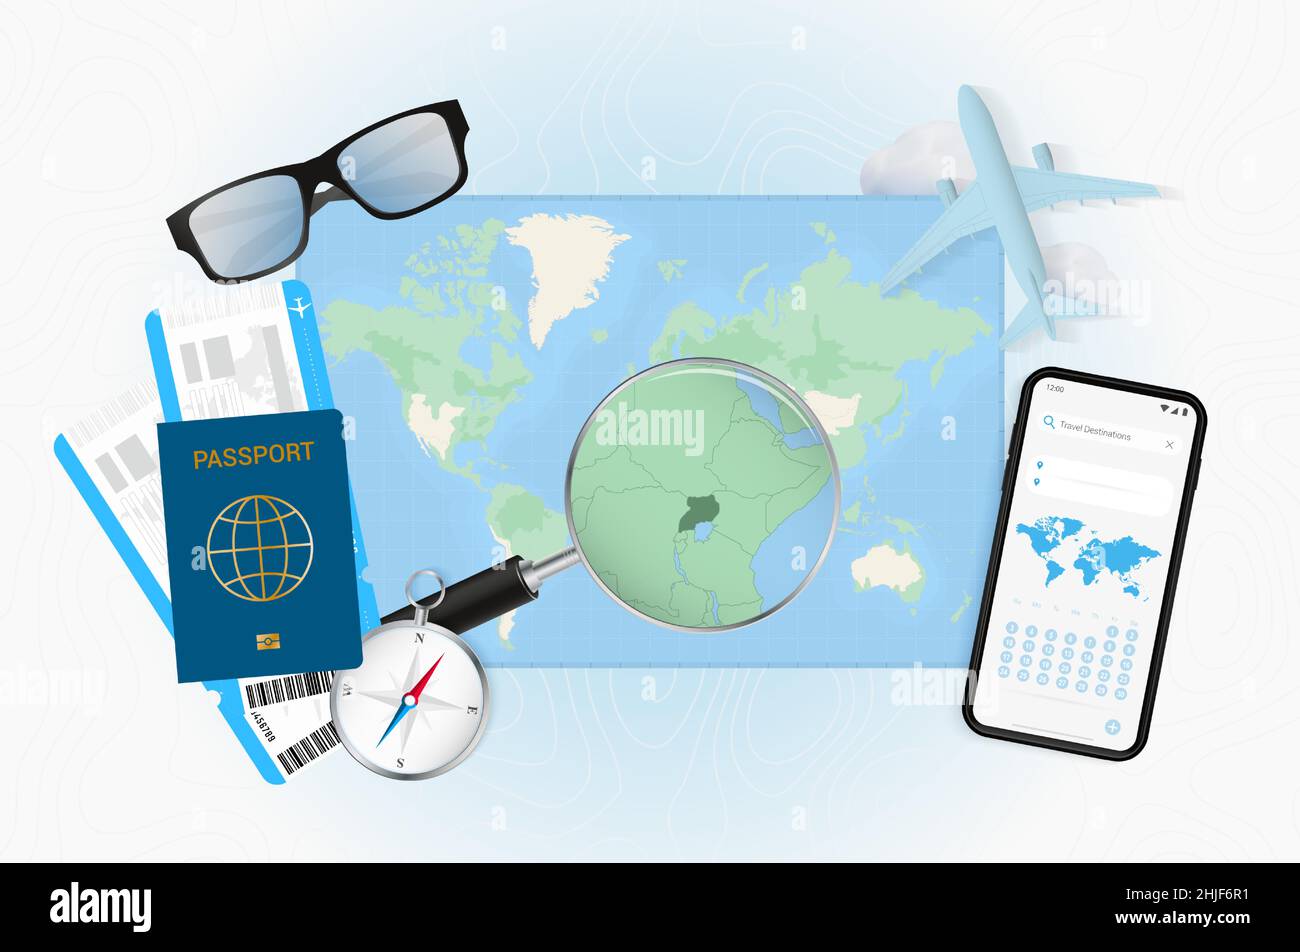 Conceptual illustration of a trip to Uganda with travel gear. World map with compass, passport, tickets, cell phone, plane and glass. Stock Vector